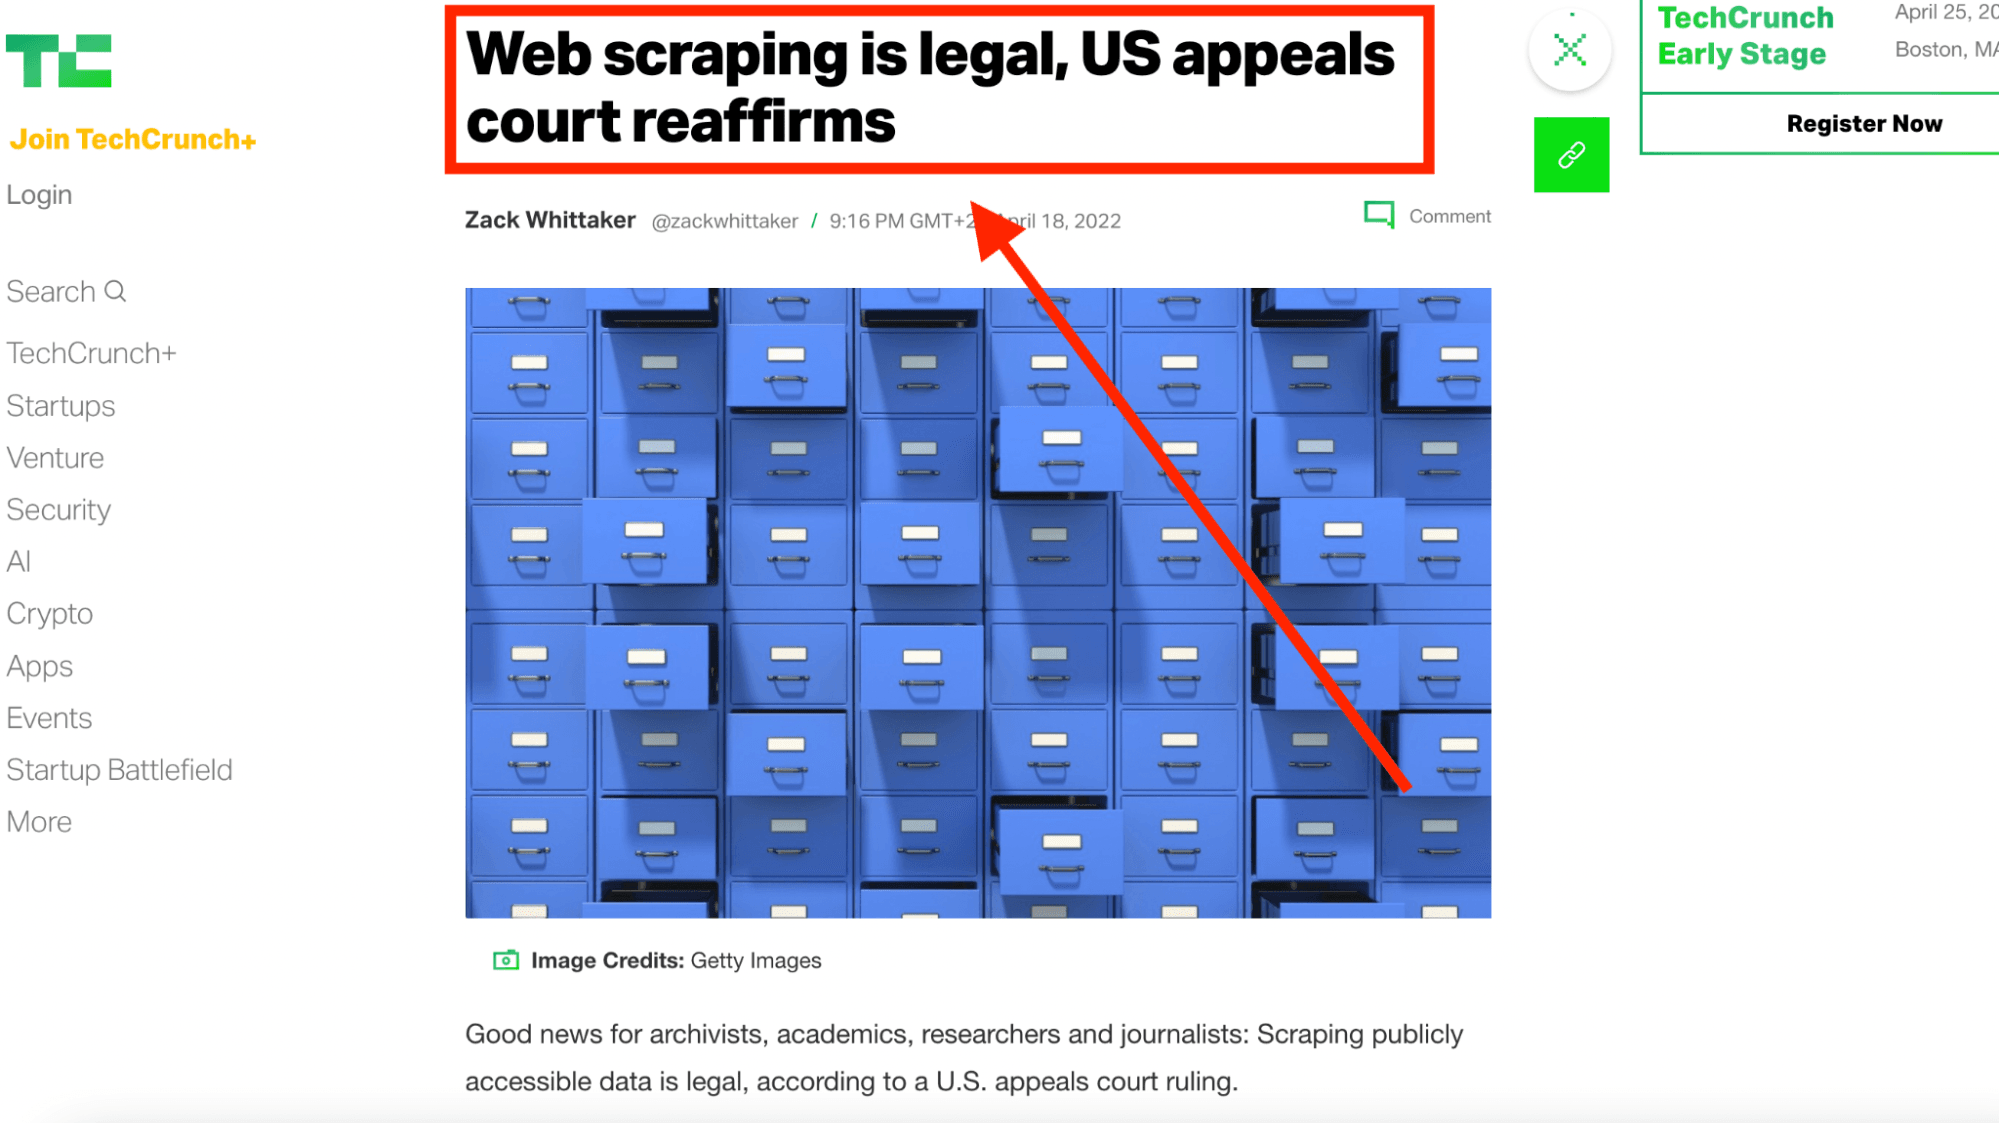 screenshot of article techcrunch about scraping being legal.png